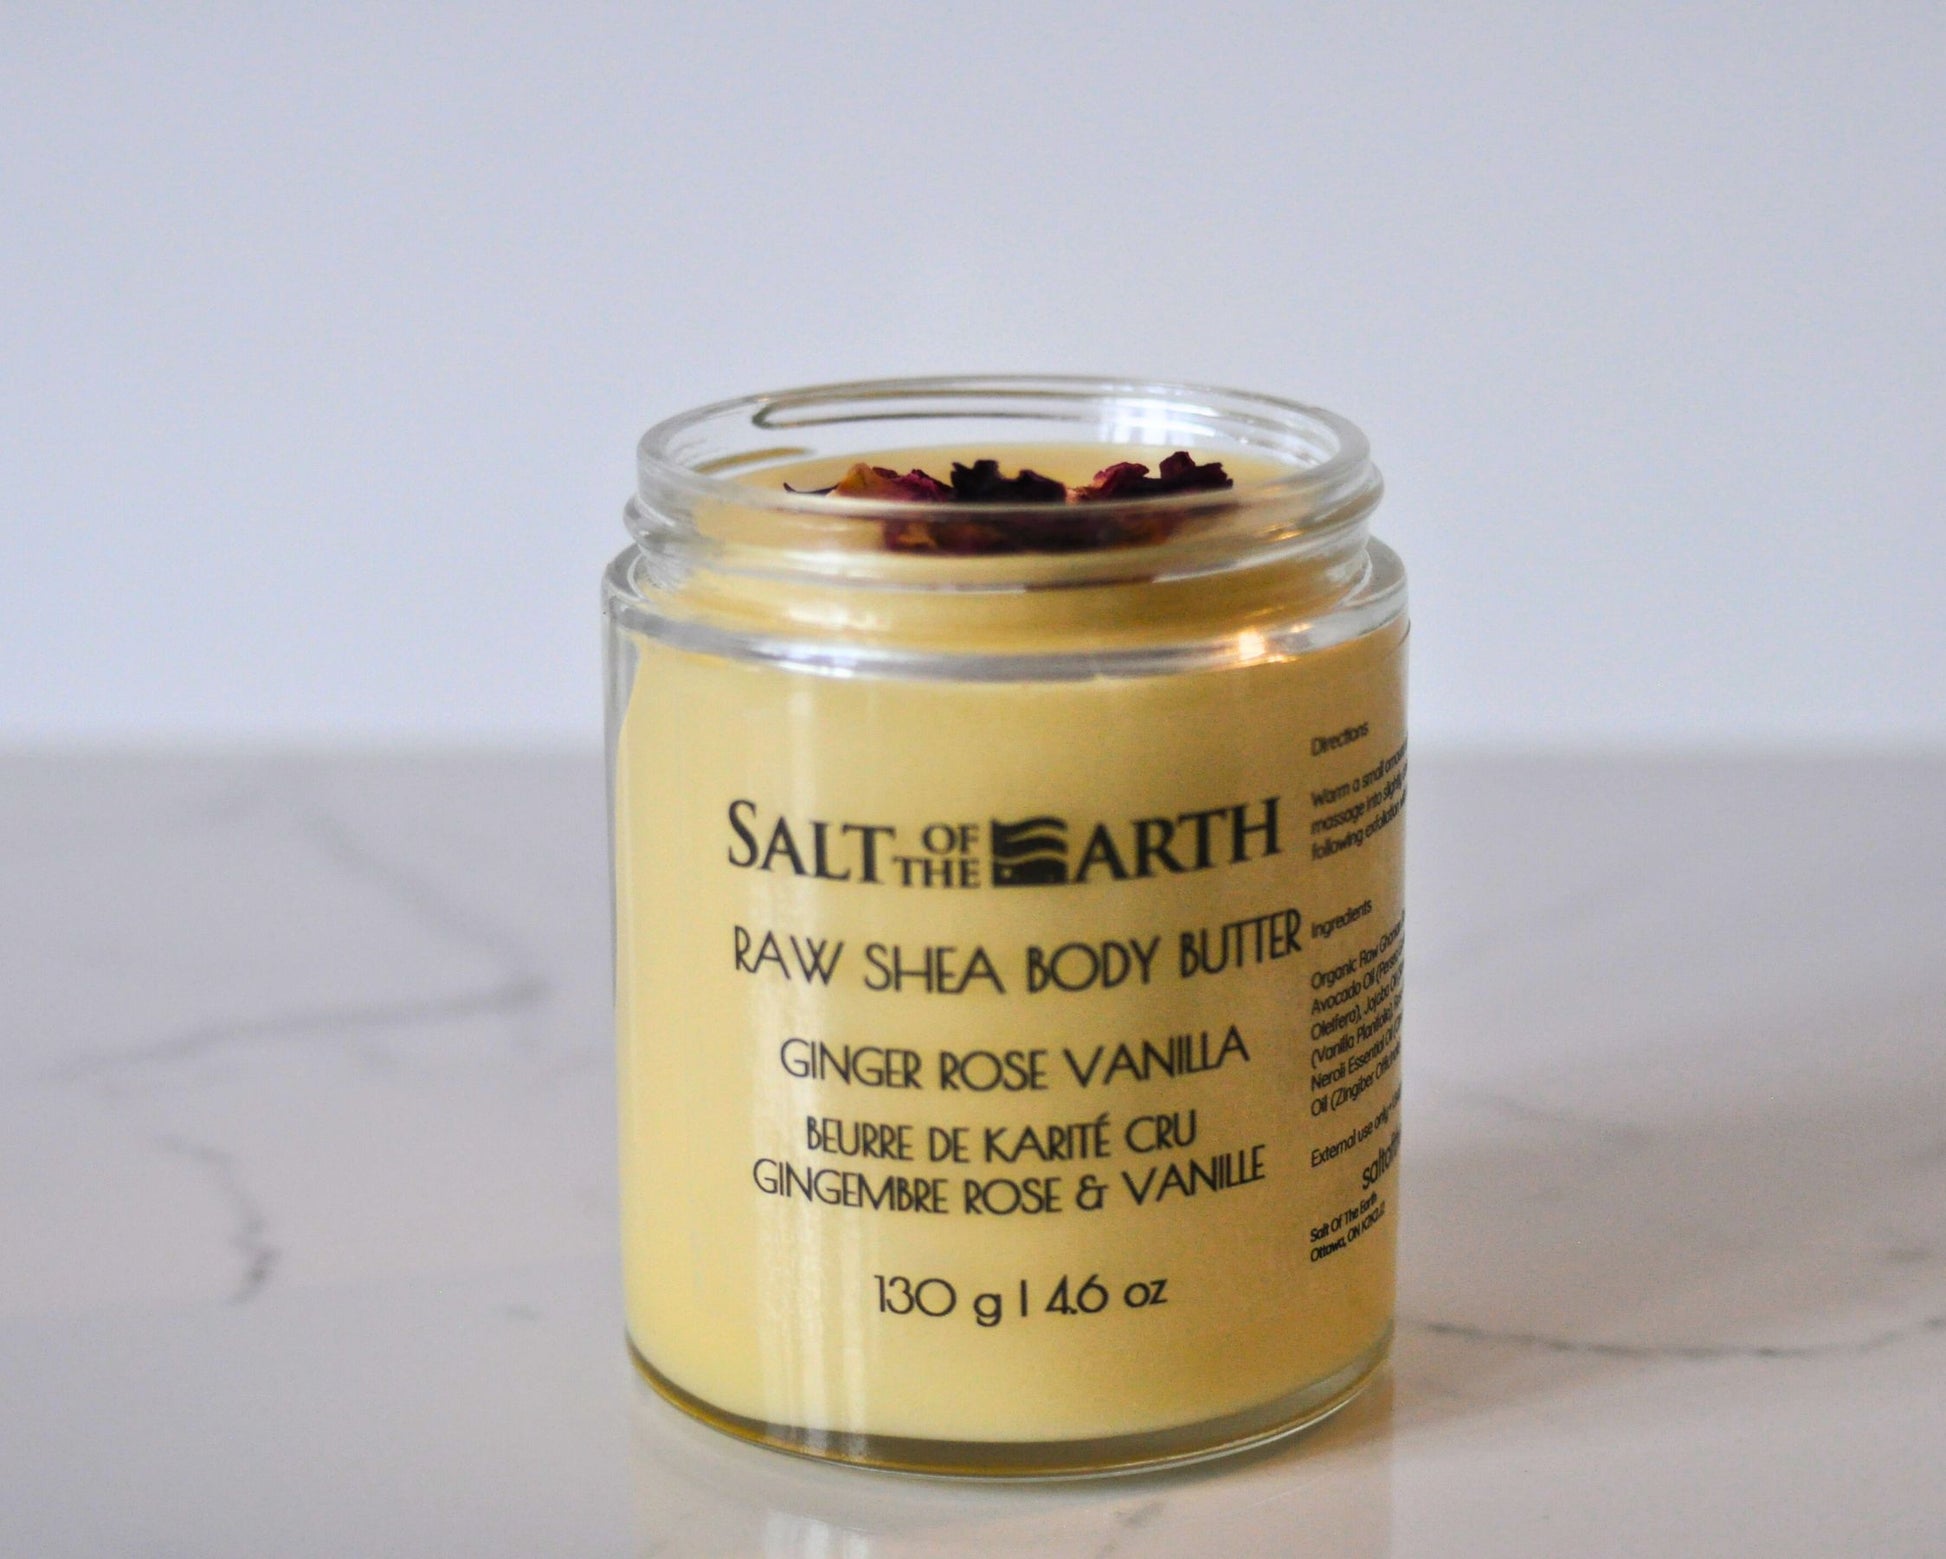 RAW SHEA BODY BUTTERS | ULTRA PENETRATING SKIN CARE FOR DRY SKIN - SALT OF THE EARTH